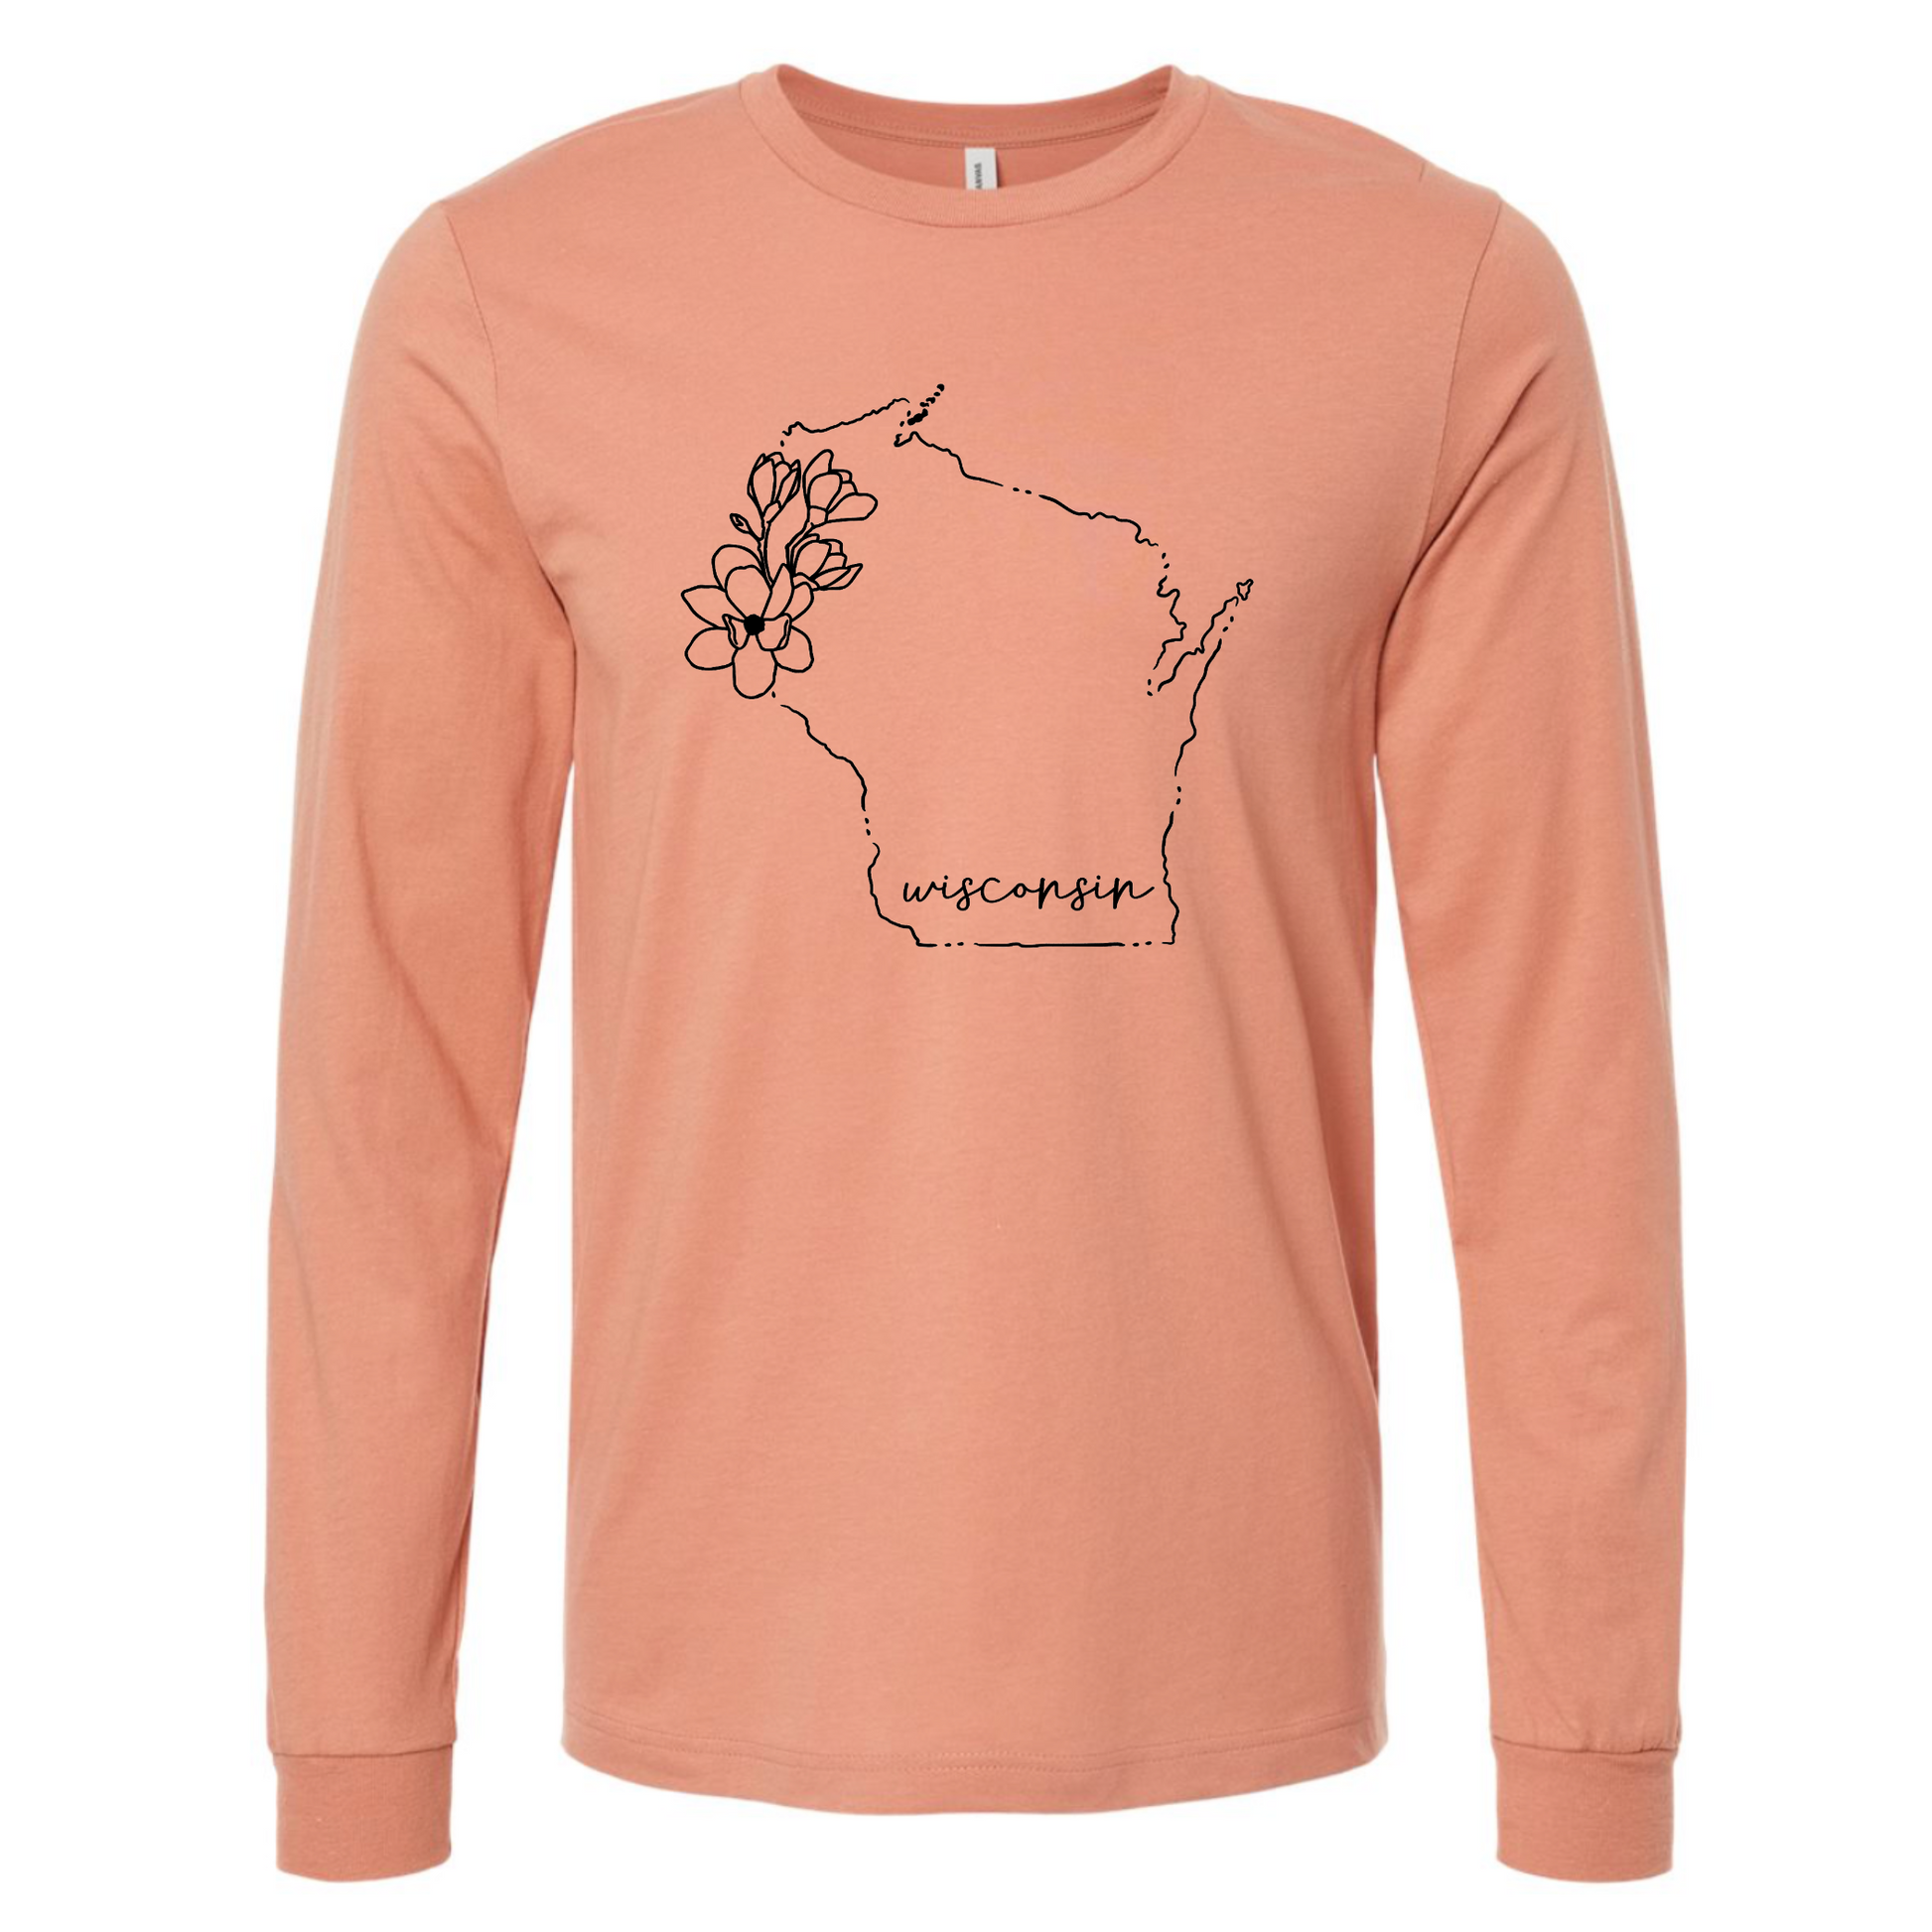 Wisconsin Floral Outline Long Sleeve Shirt in Terracotta. The from top the shirt has a dainty black outline of the state of Wisconsin, with some simple flowers on the left hand side of the state with "Wisconsin" in cursive writing at the bottom inside of the state outline. This is the front view of the shirt.